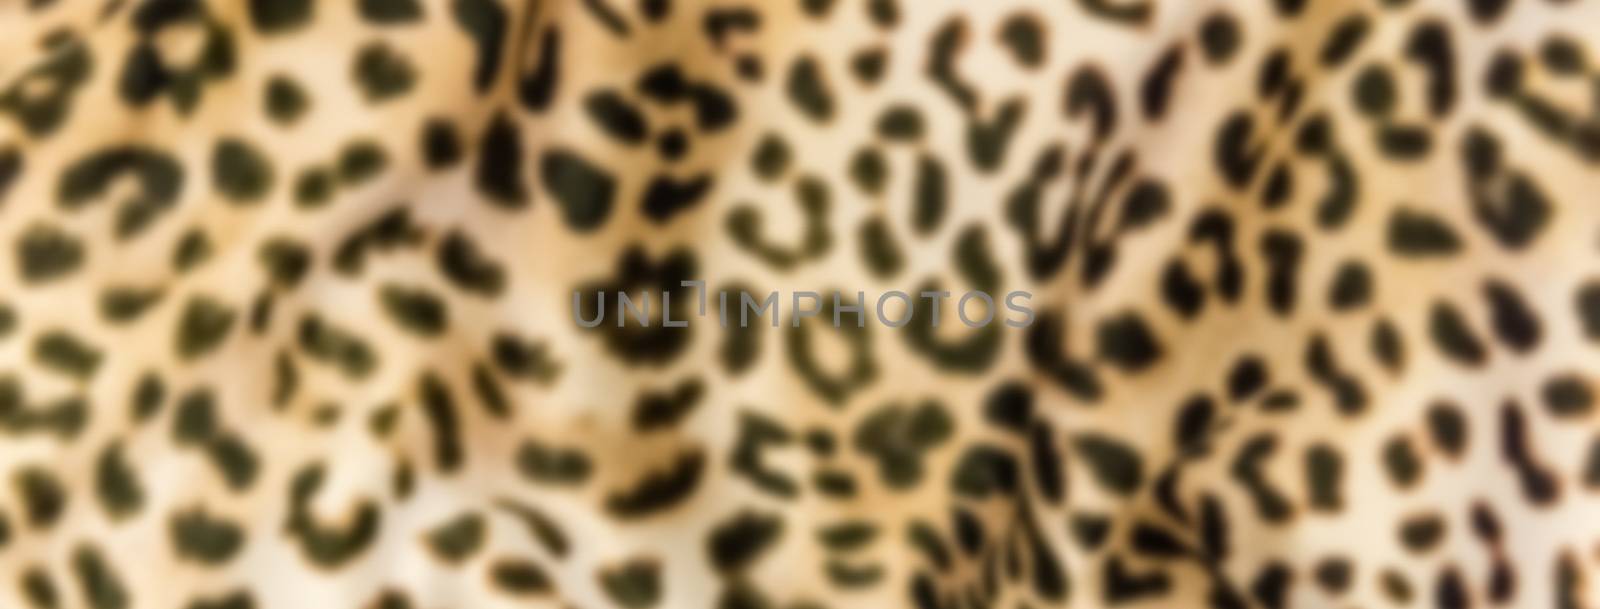 Defocused background of a fabric texture by marcorubino